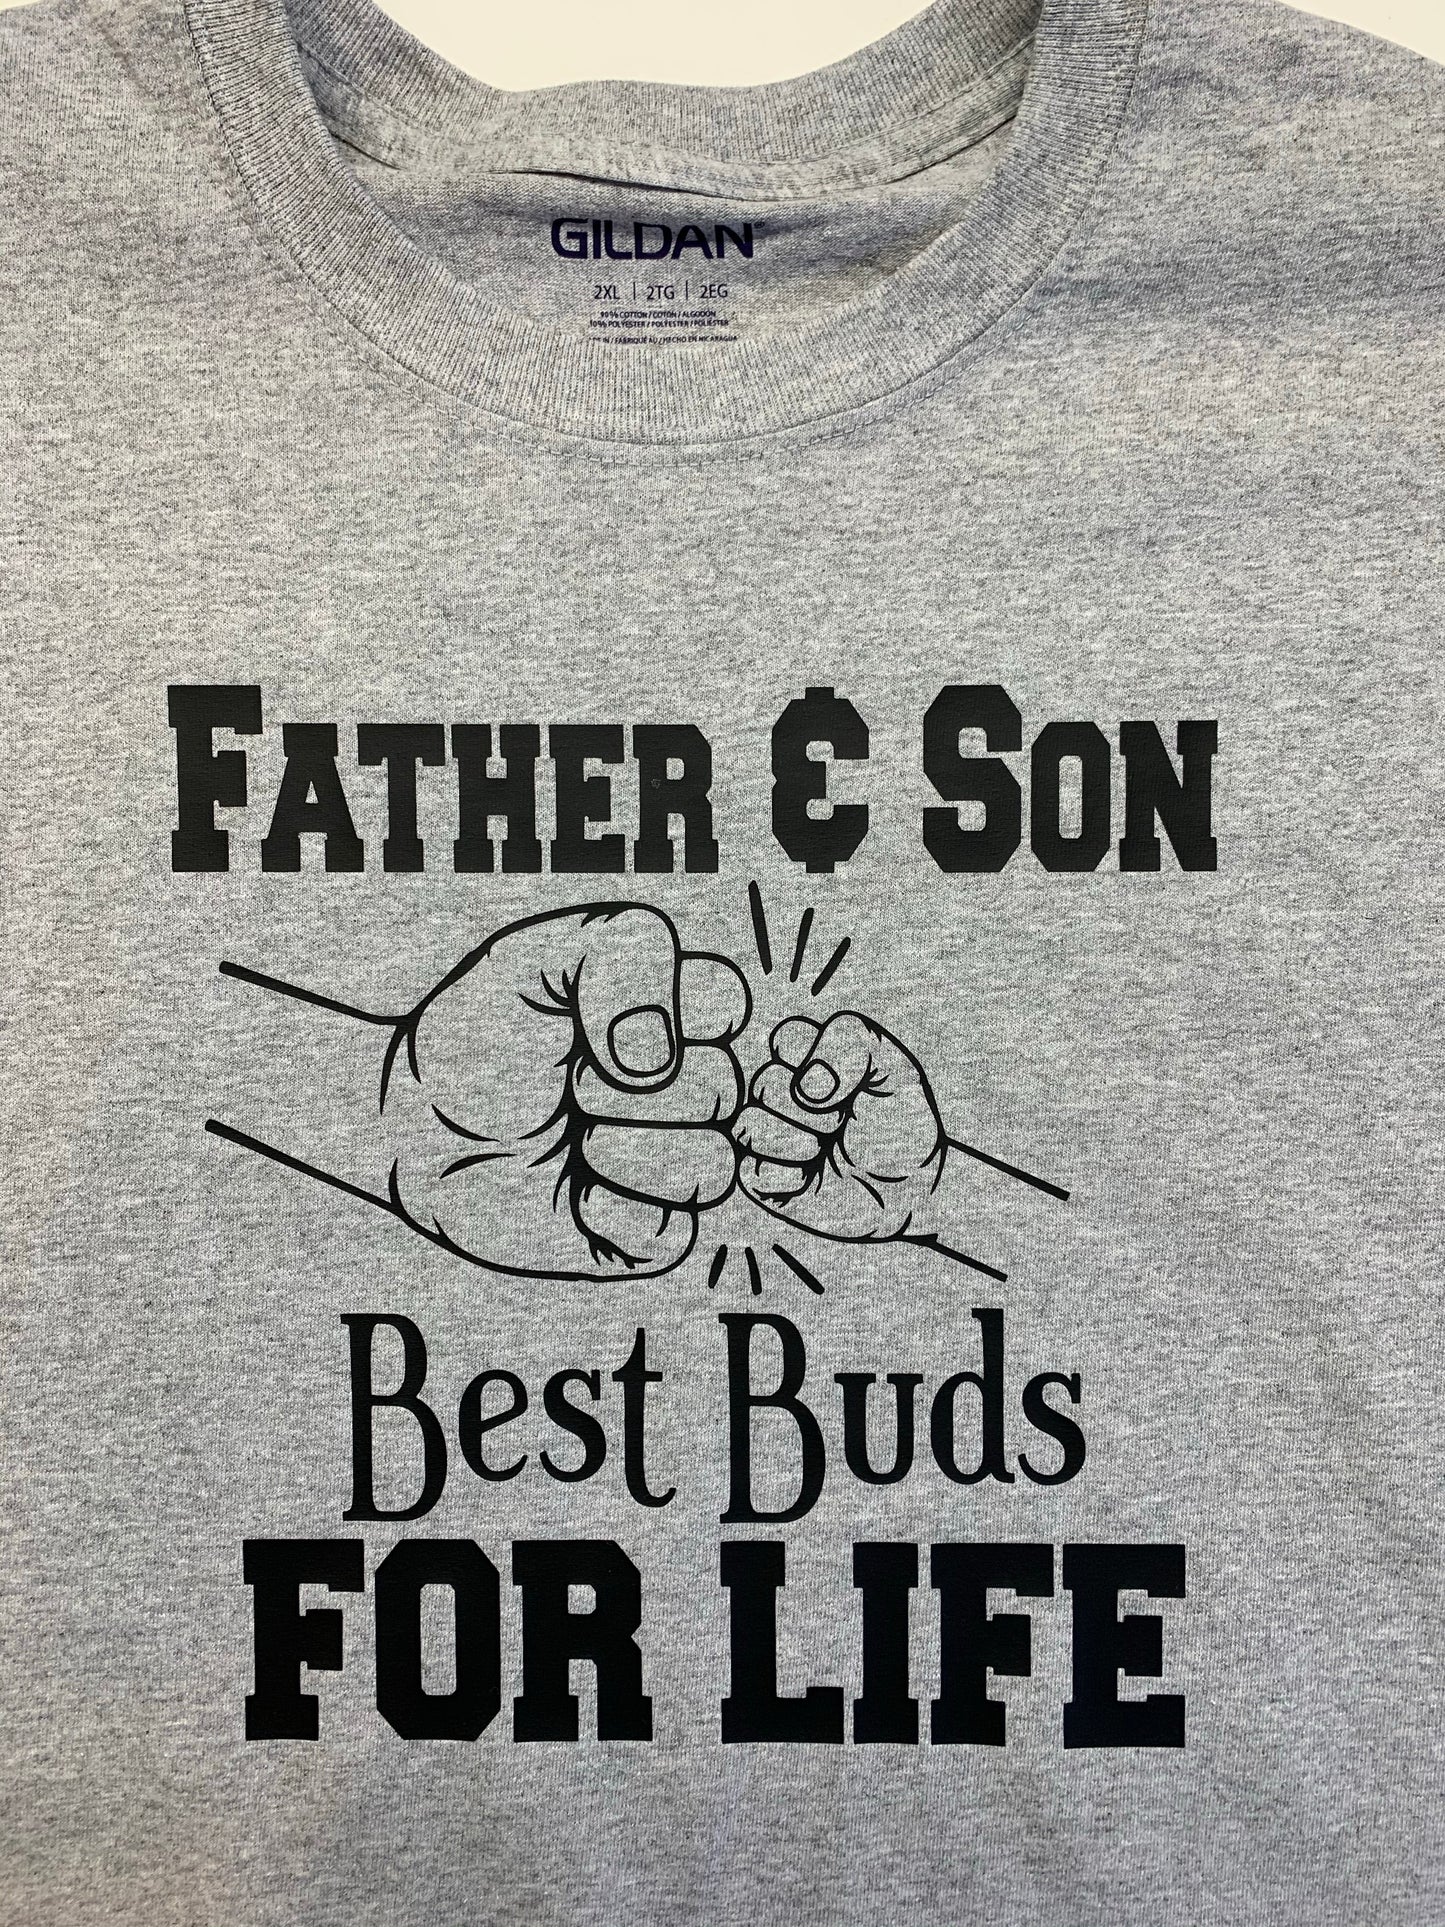 Father and son best buds for life, Father's Day gift, present from son